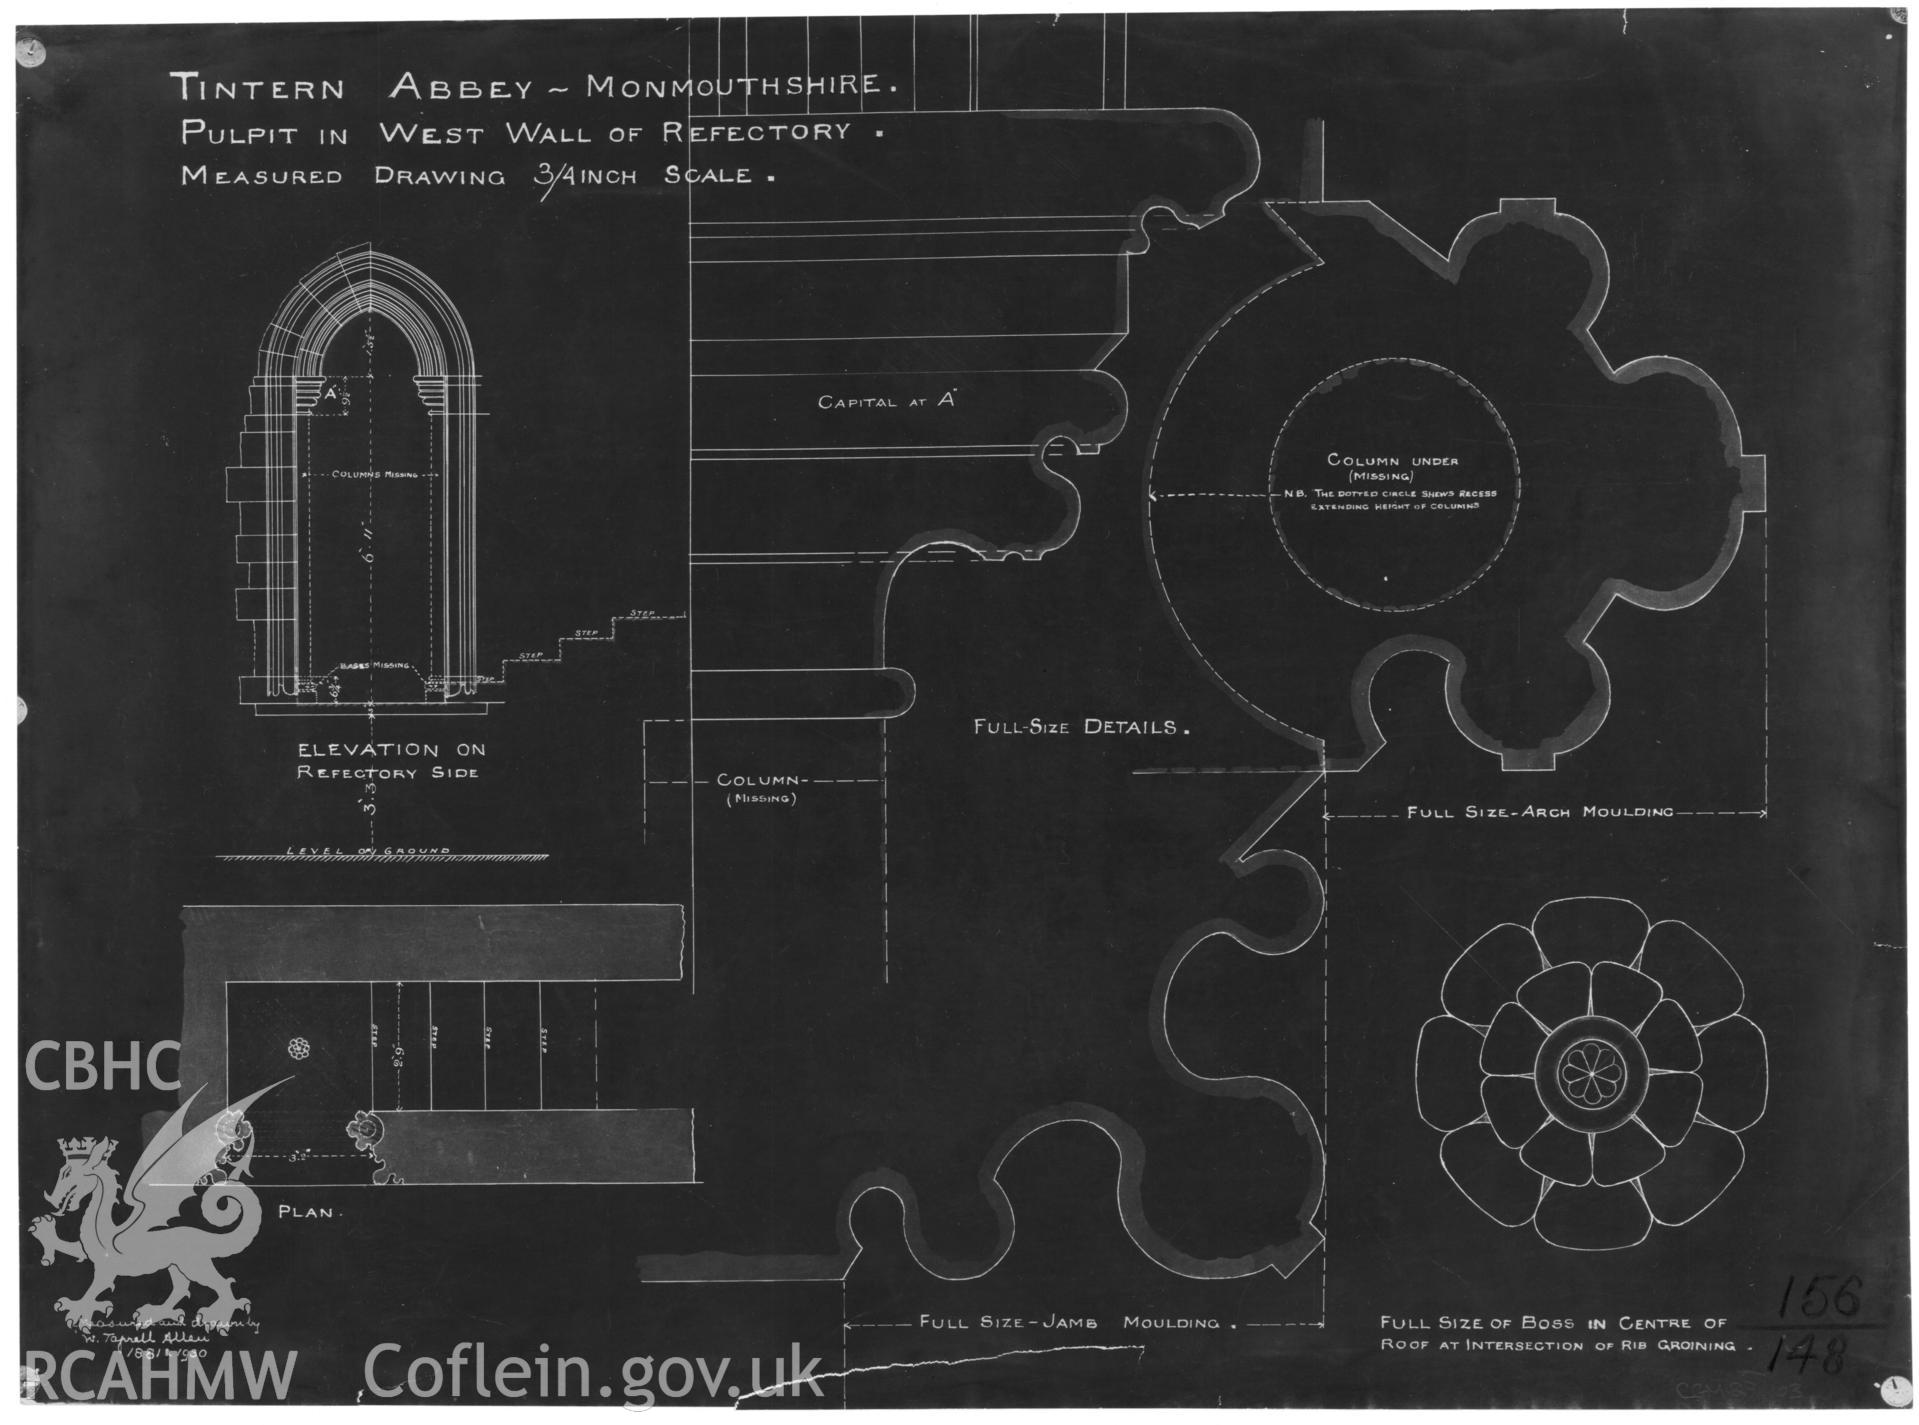 Digital copy of Cadw guardianship monument drawing of Tintern Abbey, negative carbon copy showing detail of pulpit in west wall of refectory, produced by W.T. Allen, 1930.